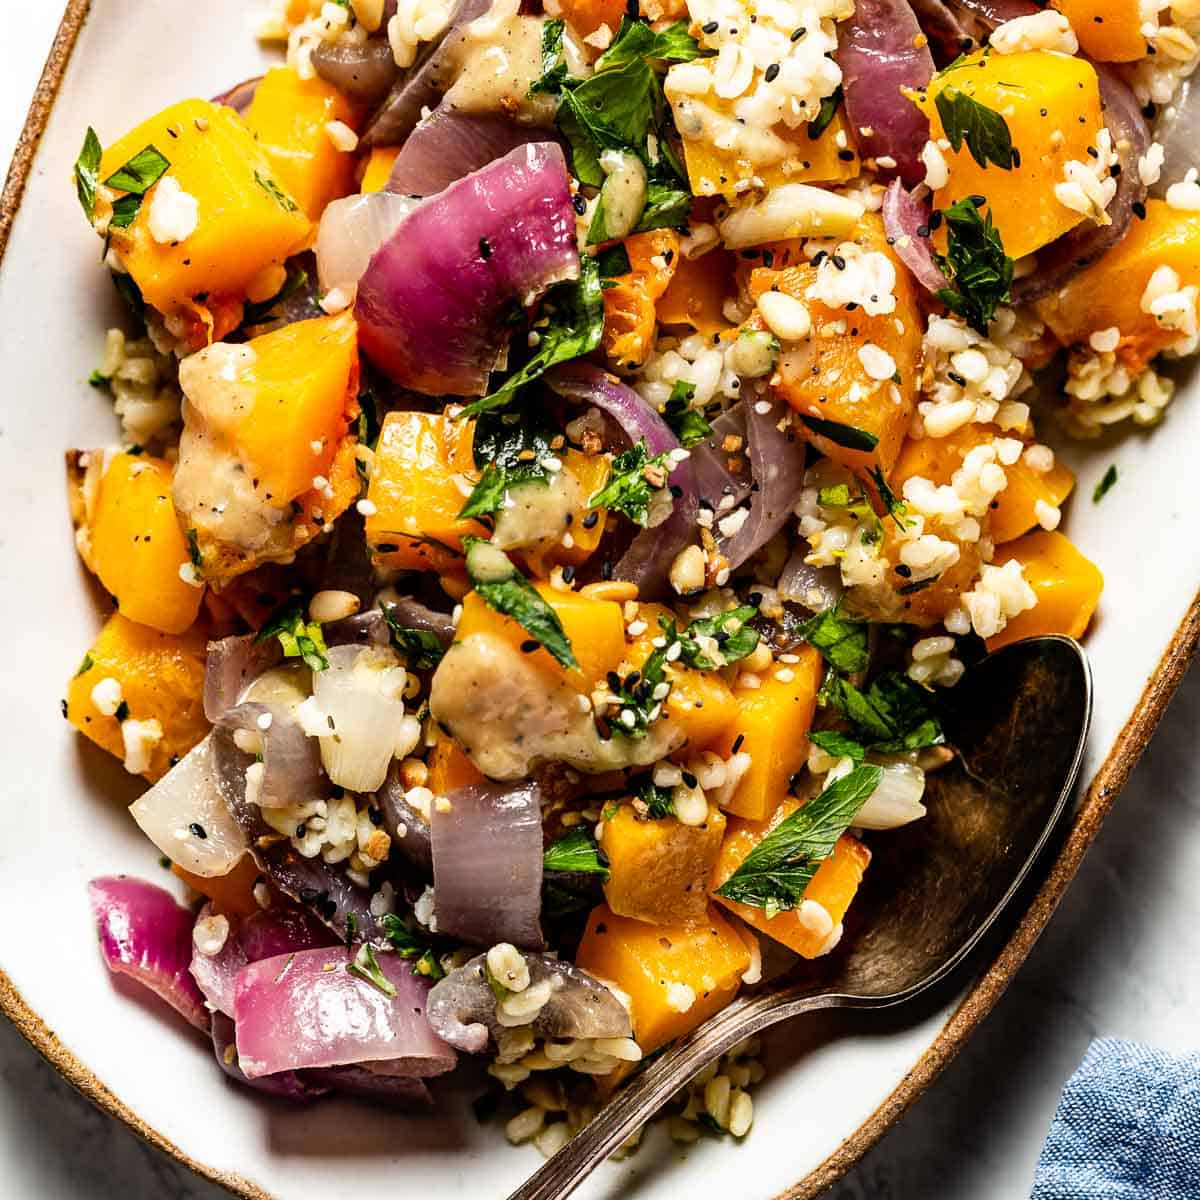 Ottolenghi's Butternut Squash Salad with Red Onion and Tahini Dressing